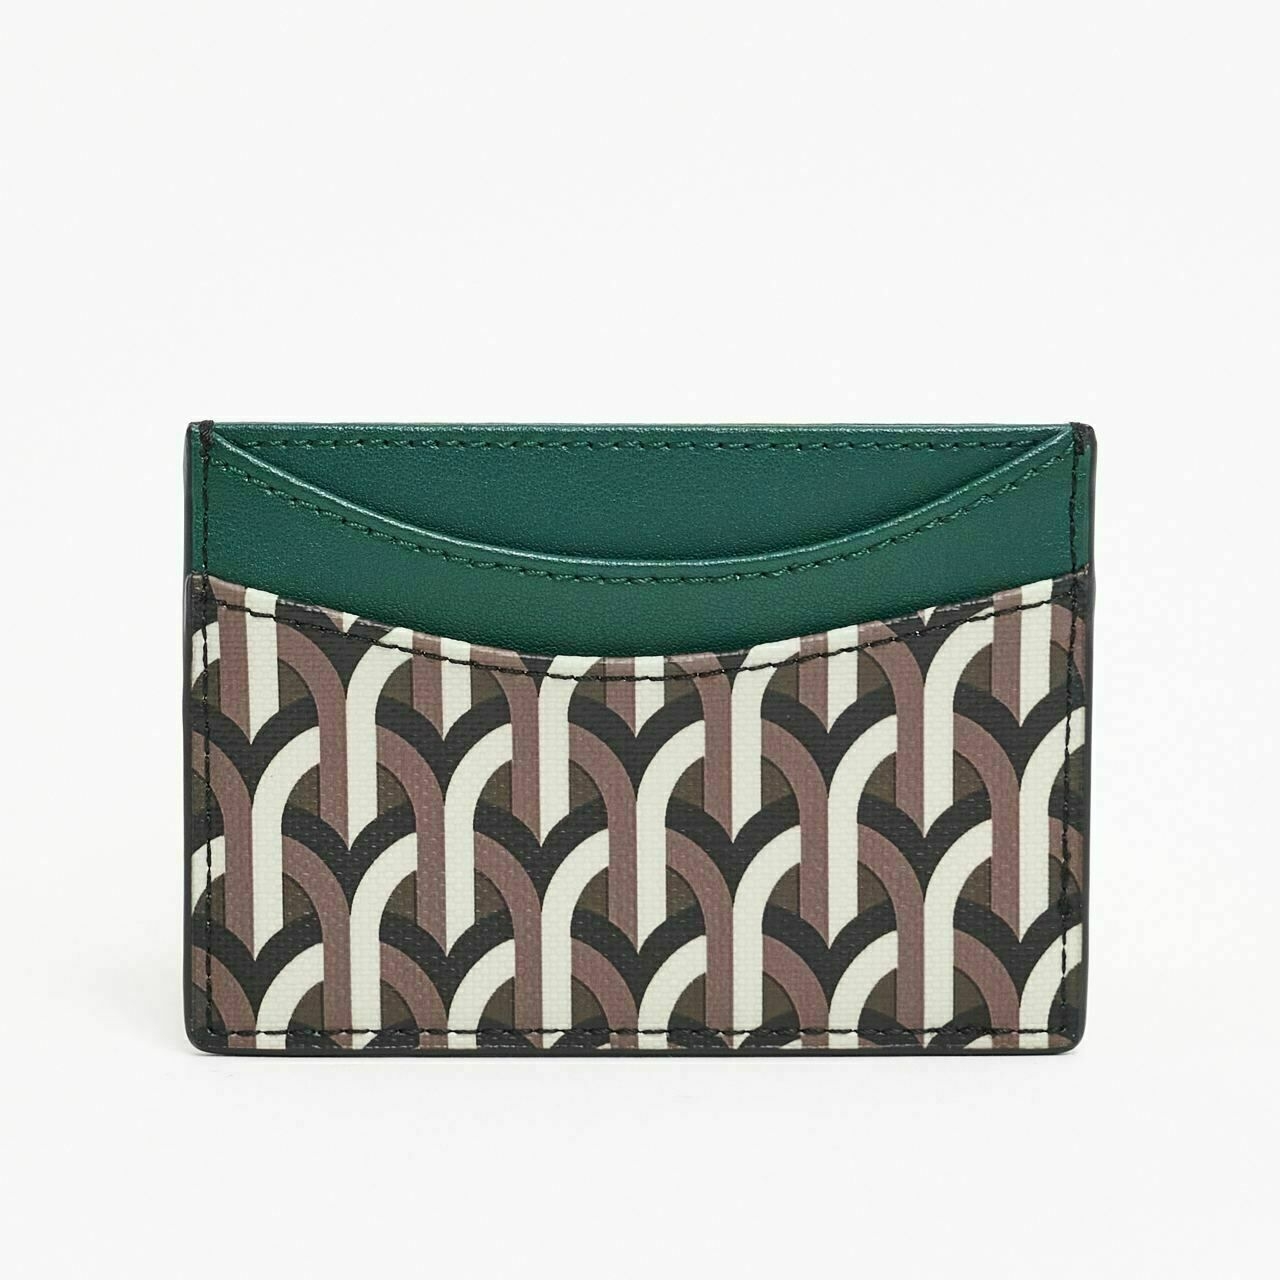 Dellest Everyday Cardcase Moss Green